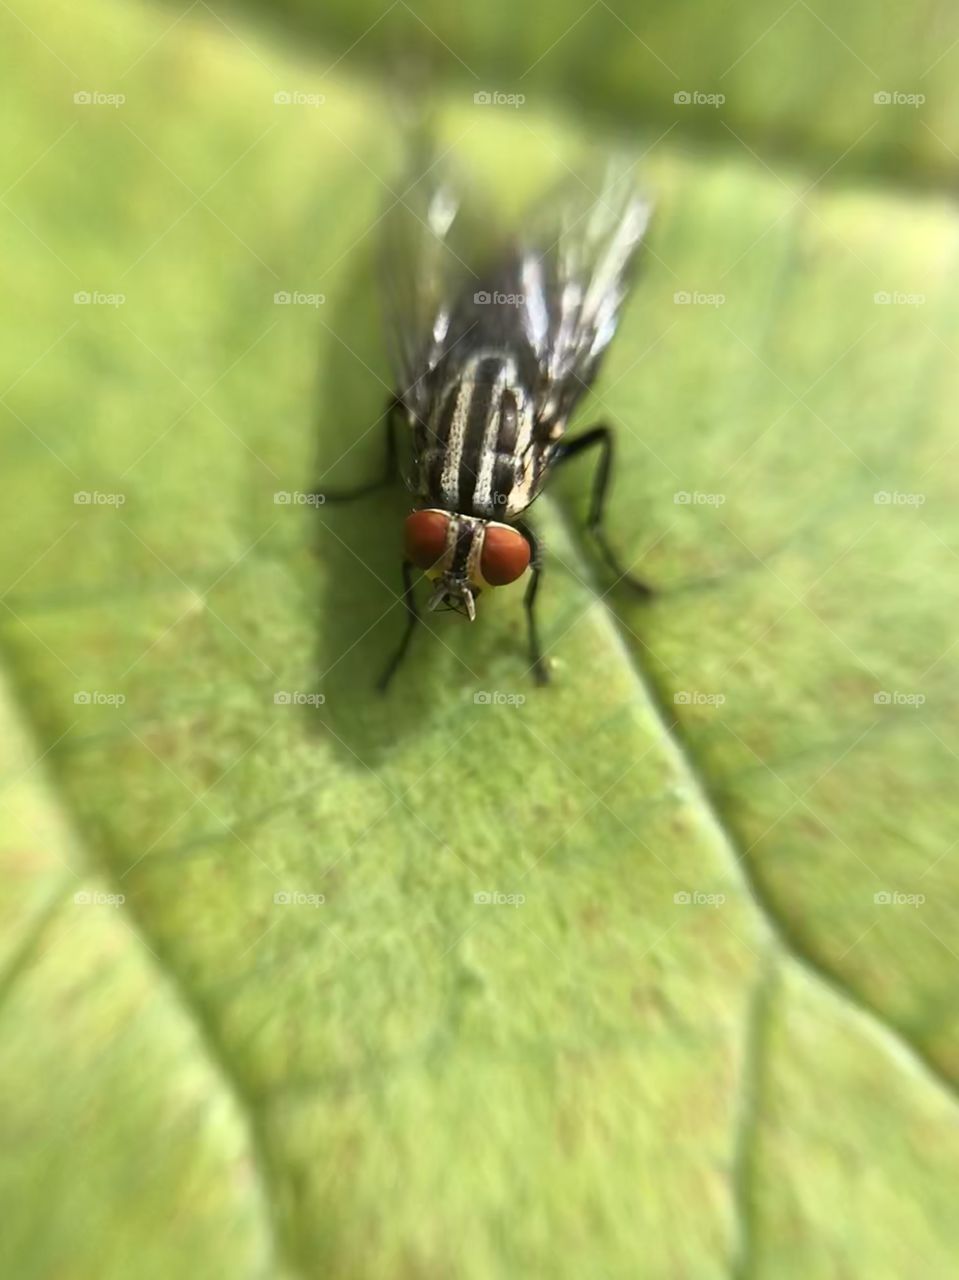 Fly in the leaf | Photo with iPhone 7 + Macro lens.